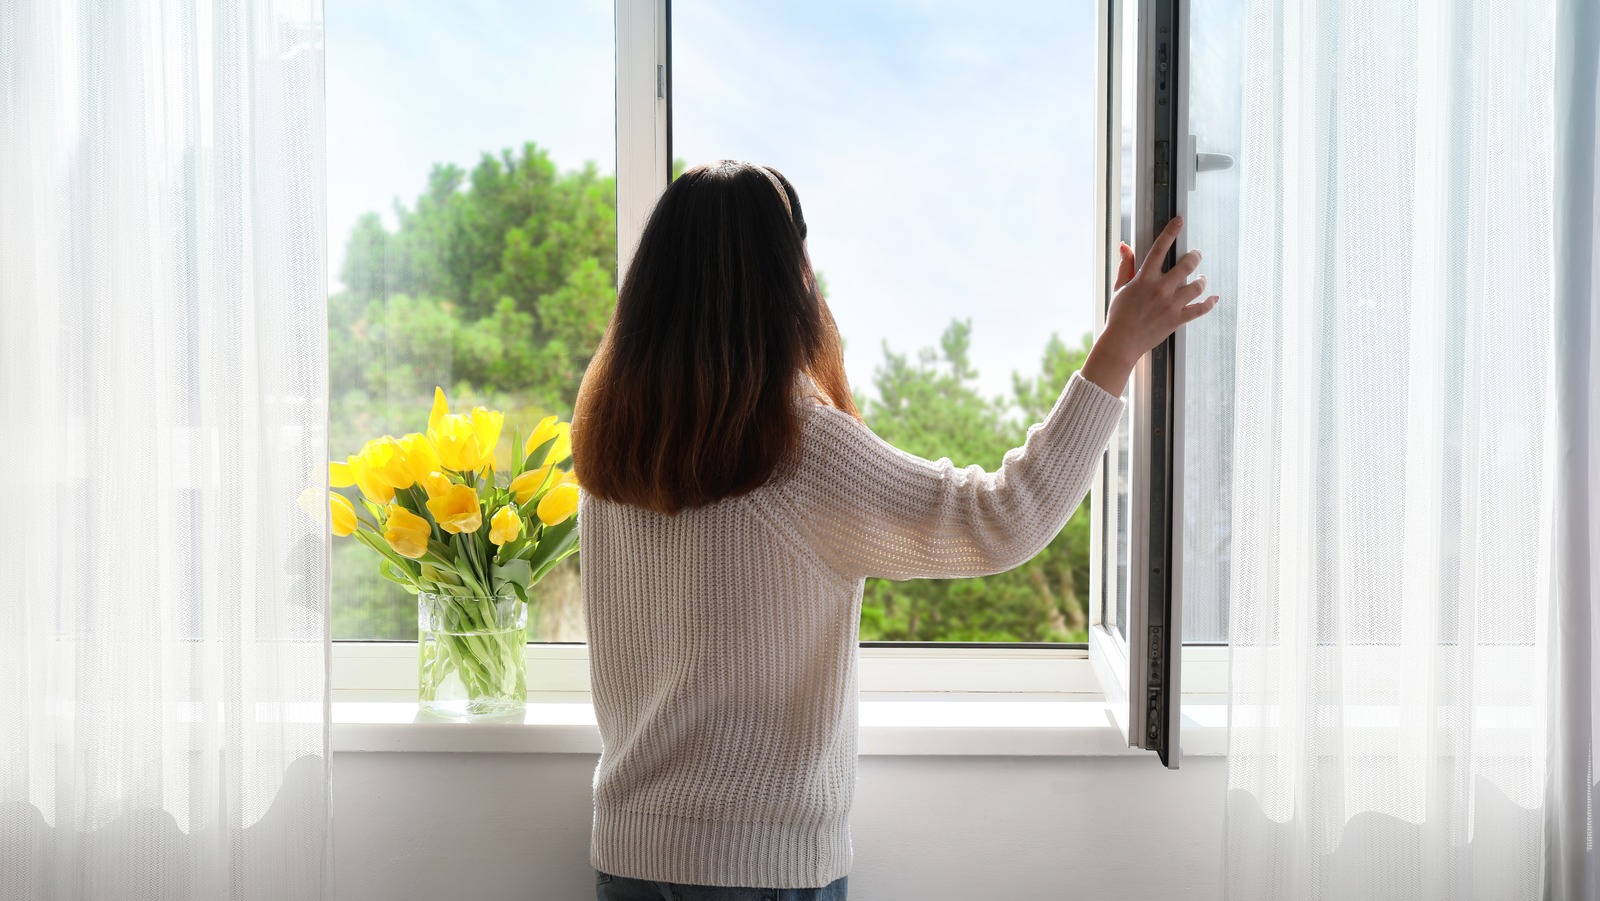 Home Depot Or Lowe's Which Has Better Deals On Replacement Windows?